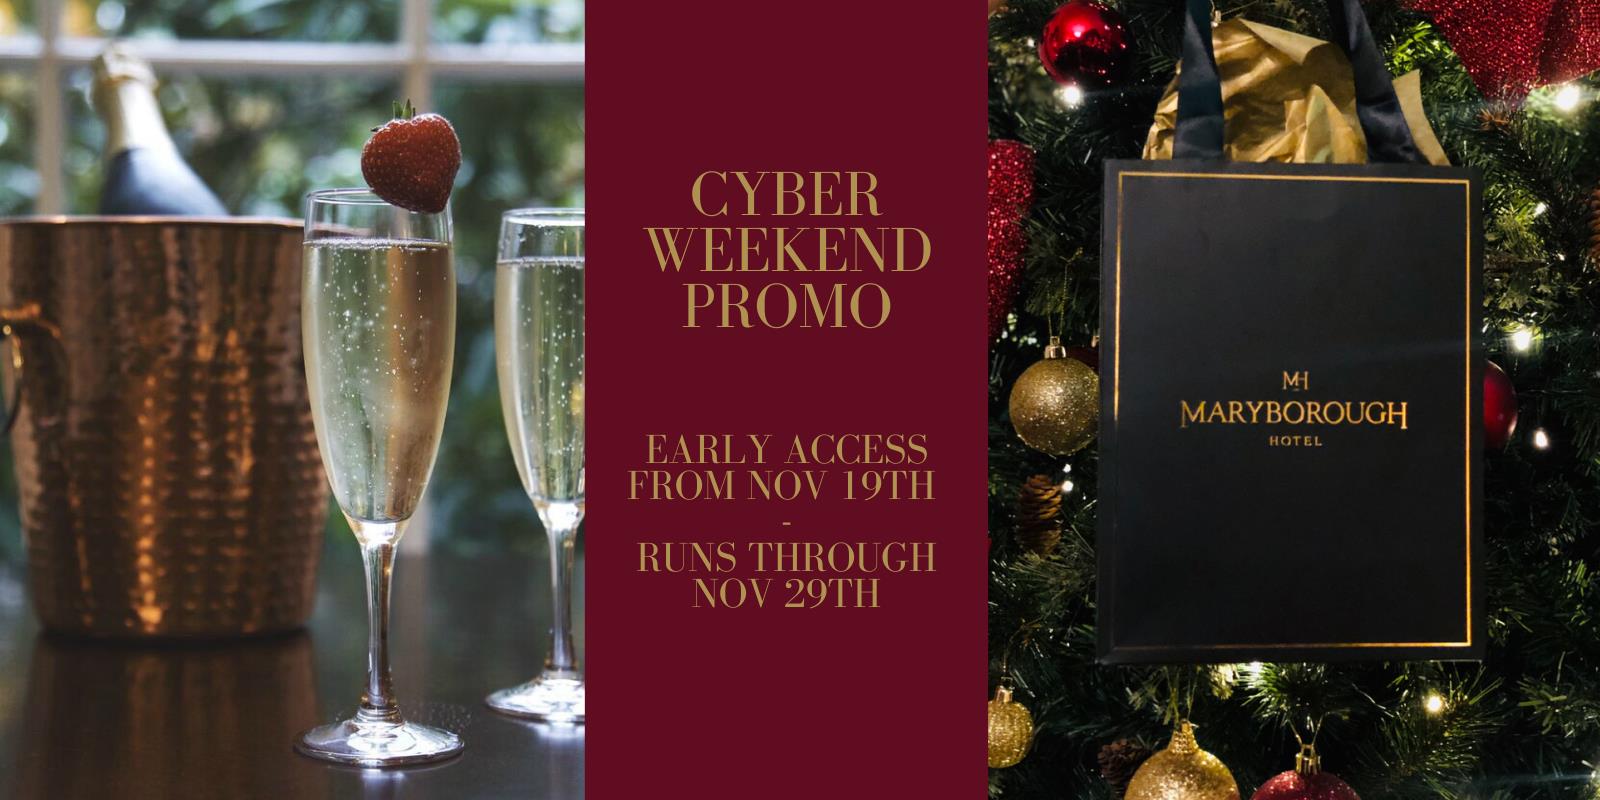 CYBER WEEKEND PROMO EARLY ACCESS FROM NO